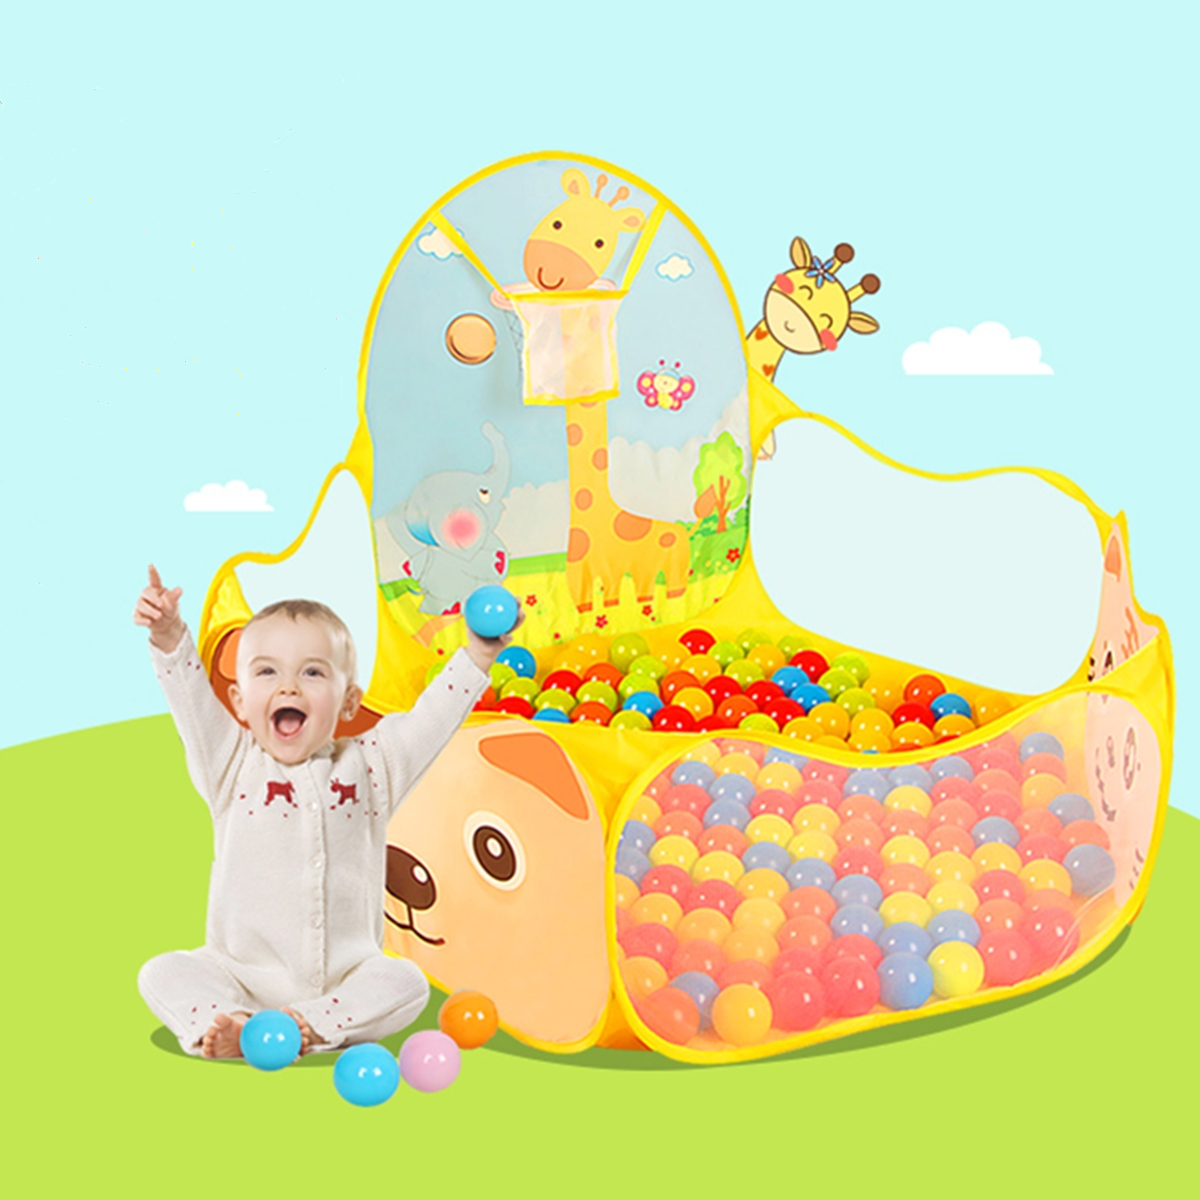 120CM-Foldable-Children-Kids-Ocean-Ball-Pool-Toy-Play-Tent-For-Indoor-Outdoor-Game-1256366